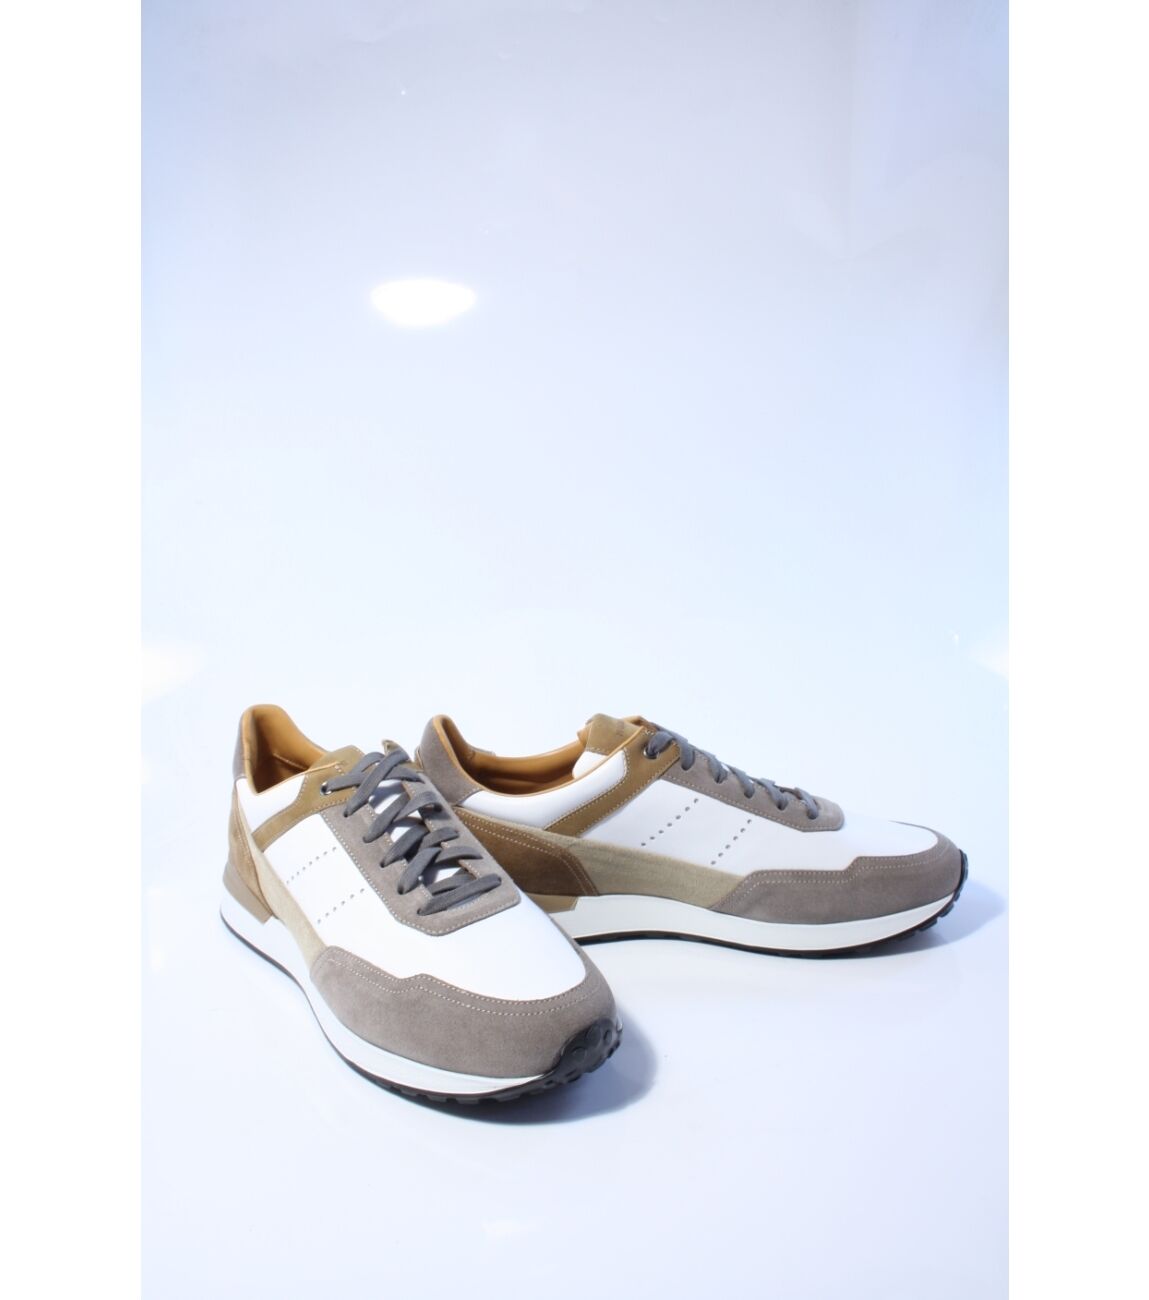 Magnanni Heren sneakers wit 41.5